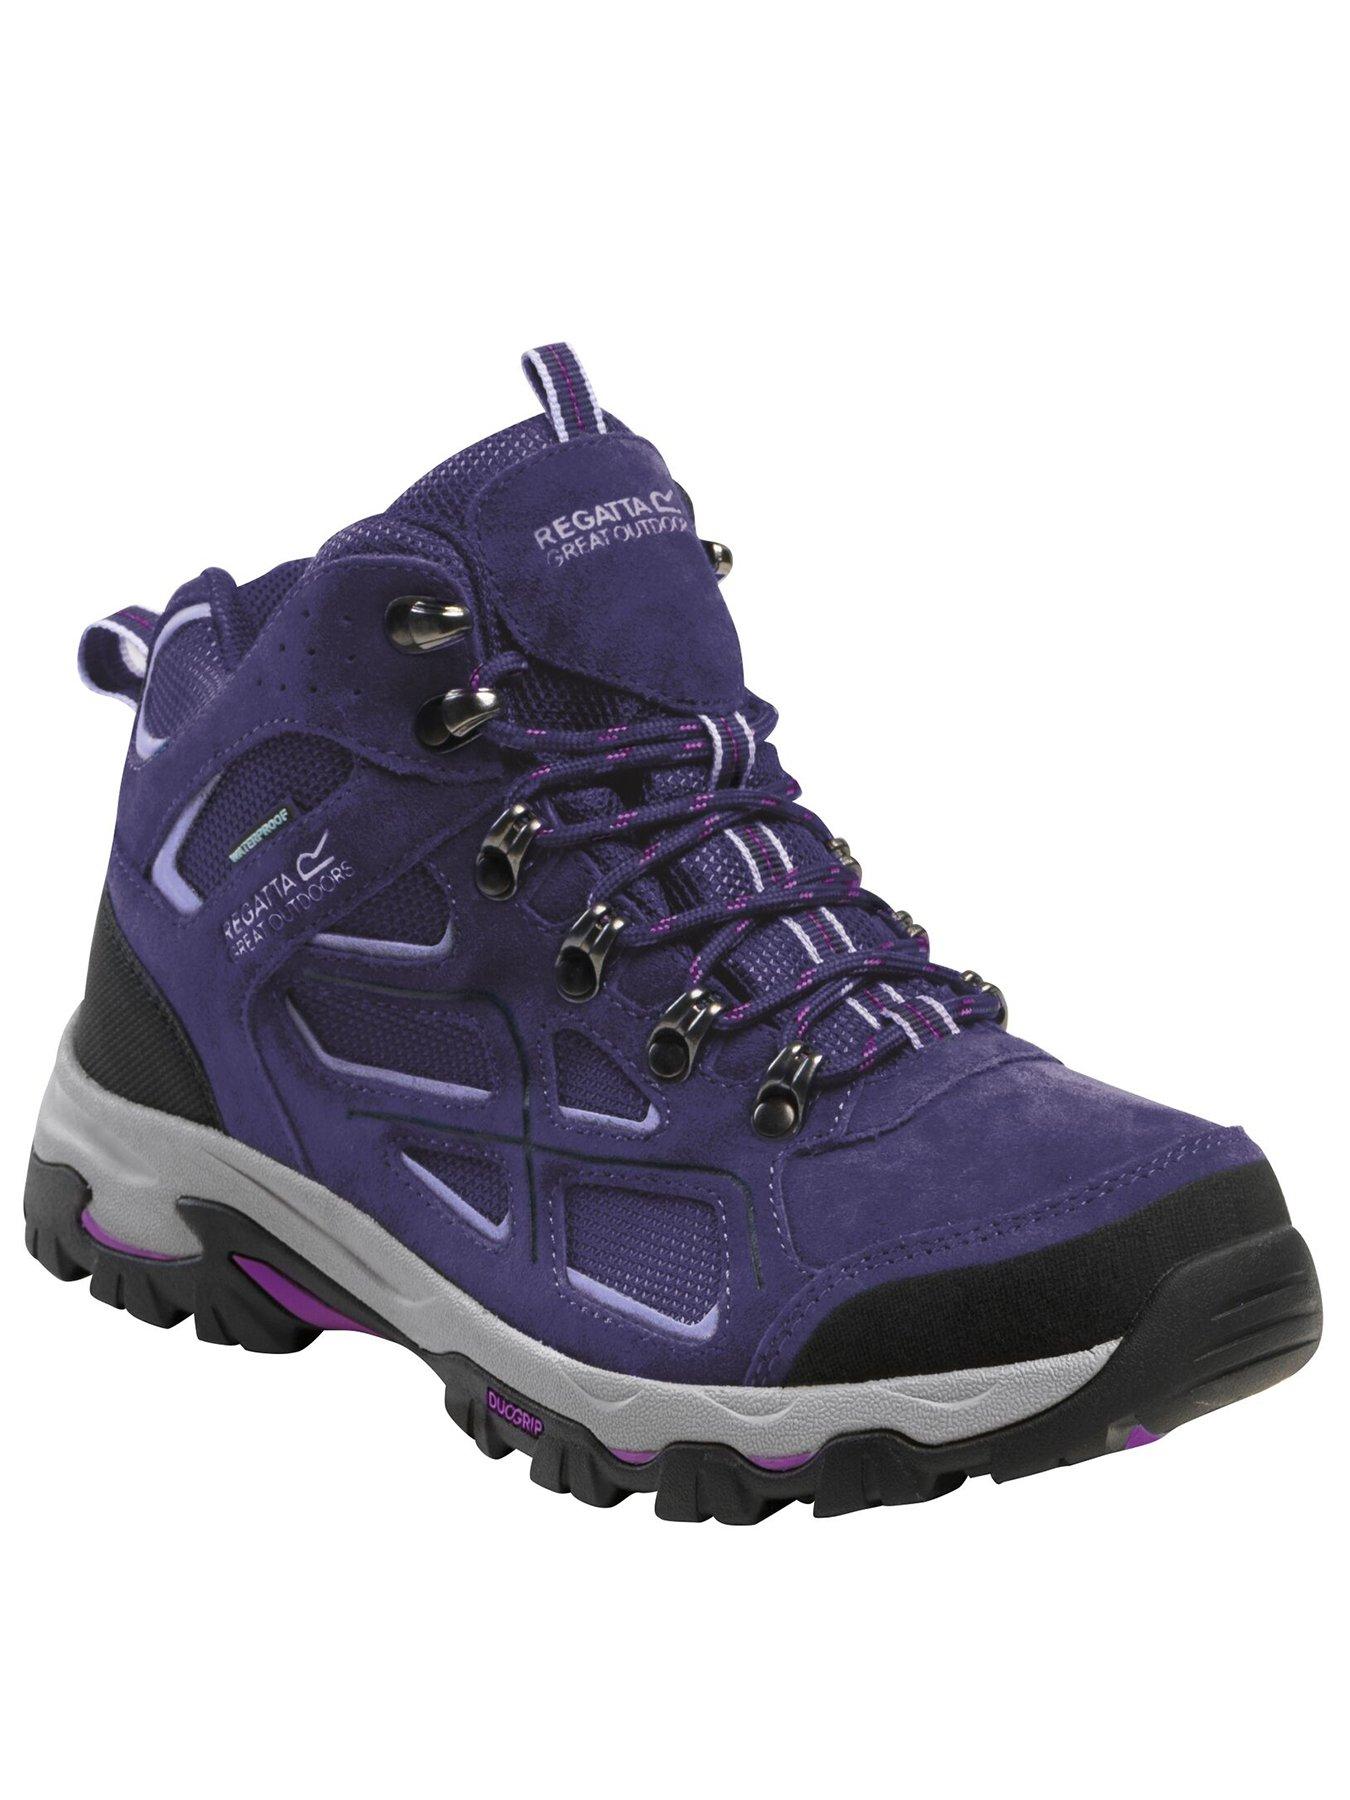 Shoes & boots Tebay Boots - Navy/Purple